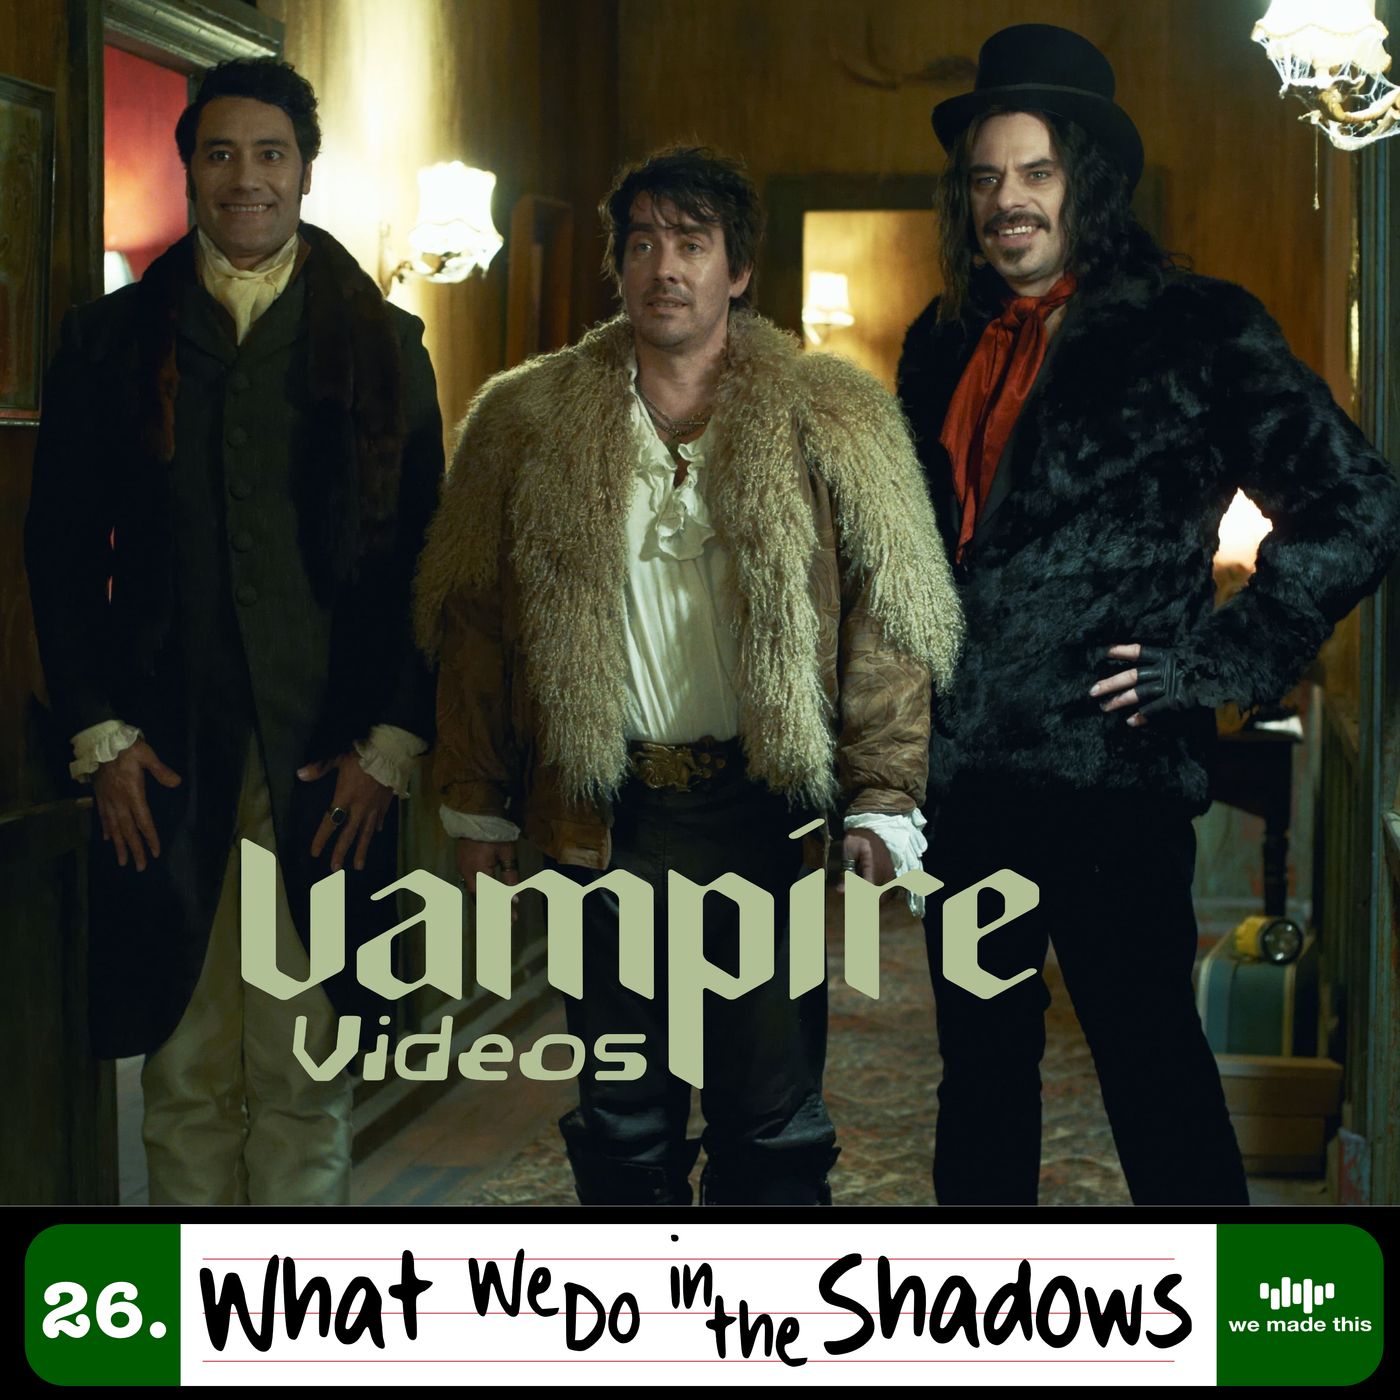 26. What We Do in the Shadows (2014) with Steve O'Brien